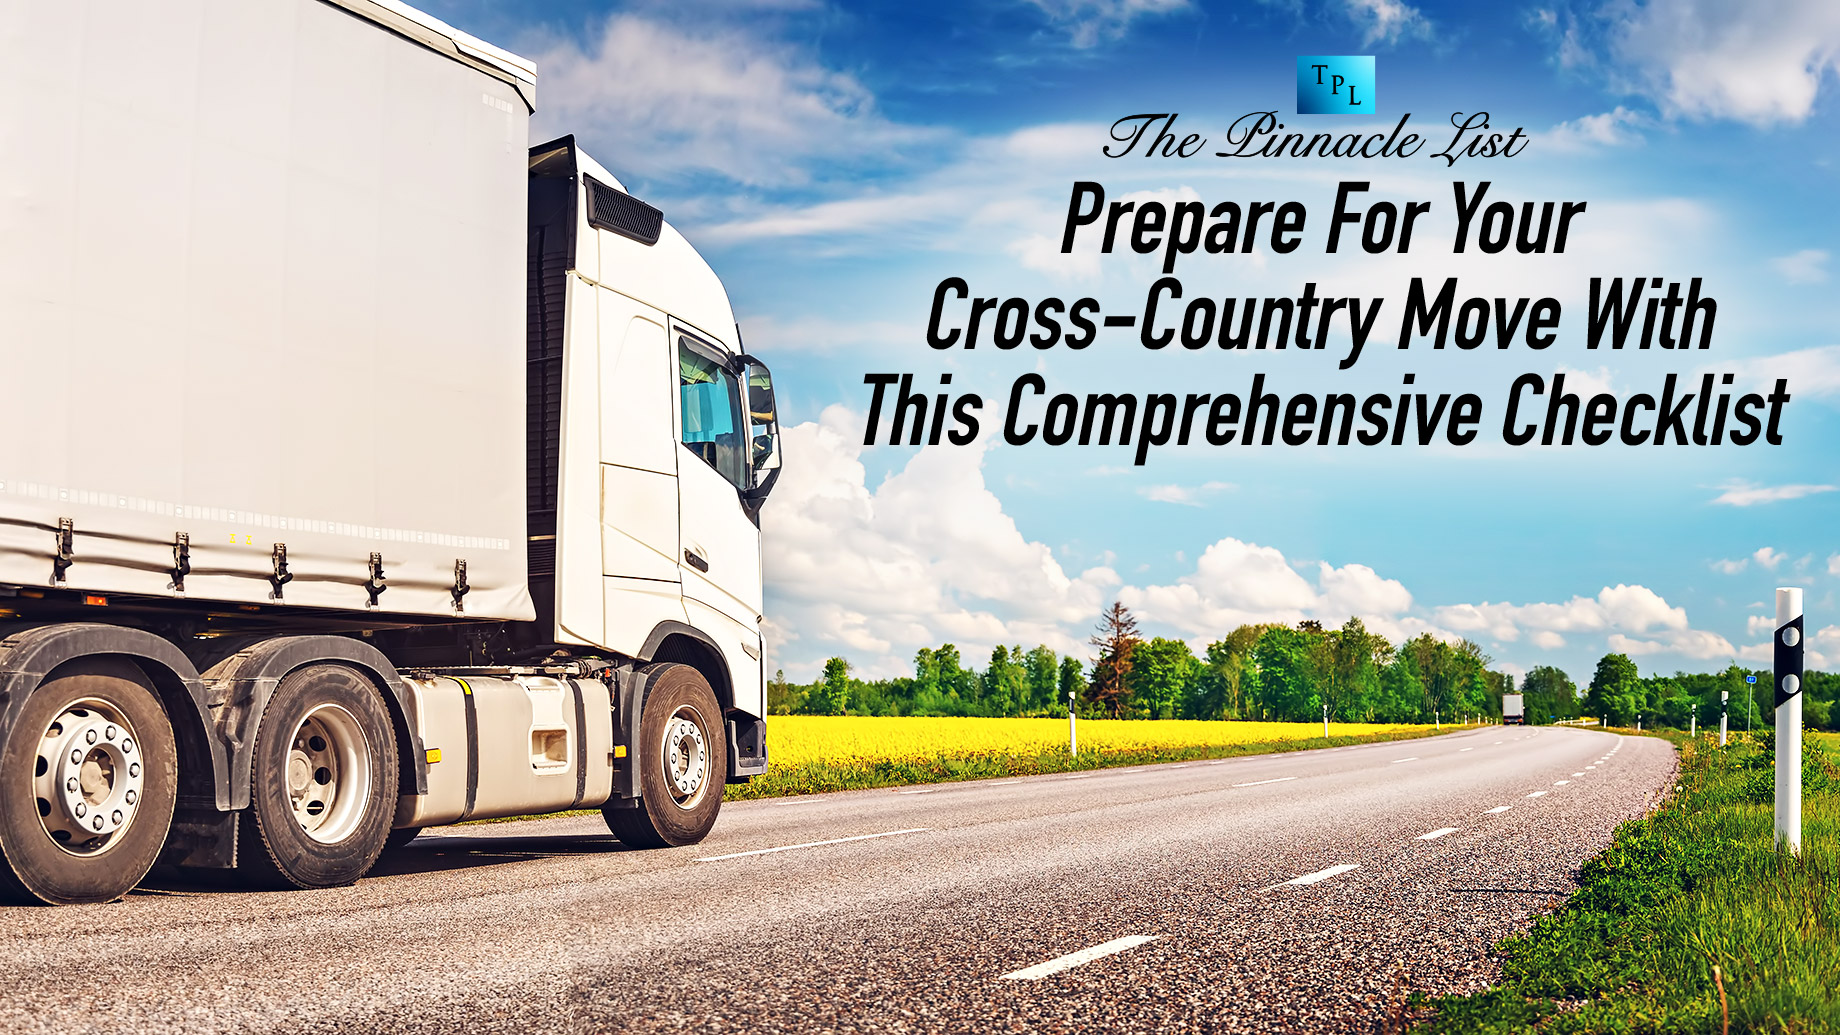 Prepare For Your Cross-Country Move With This Comprehensive Checklist